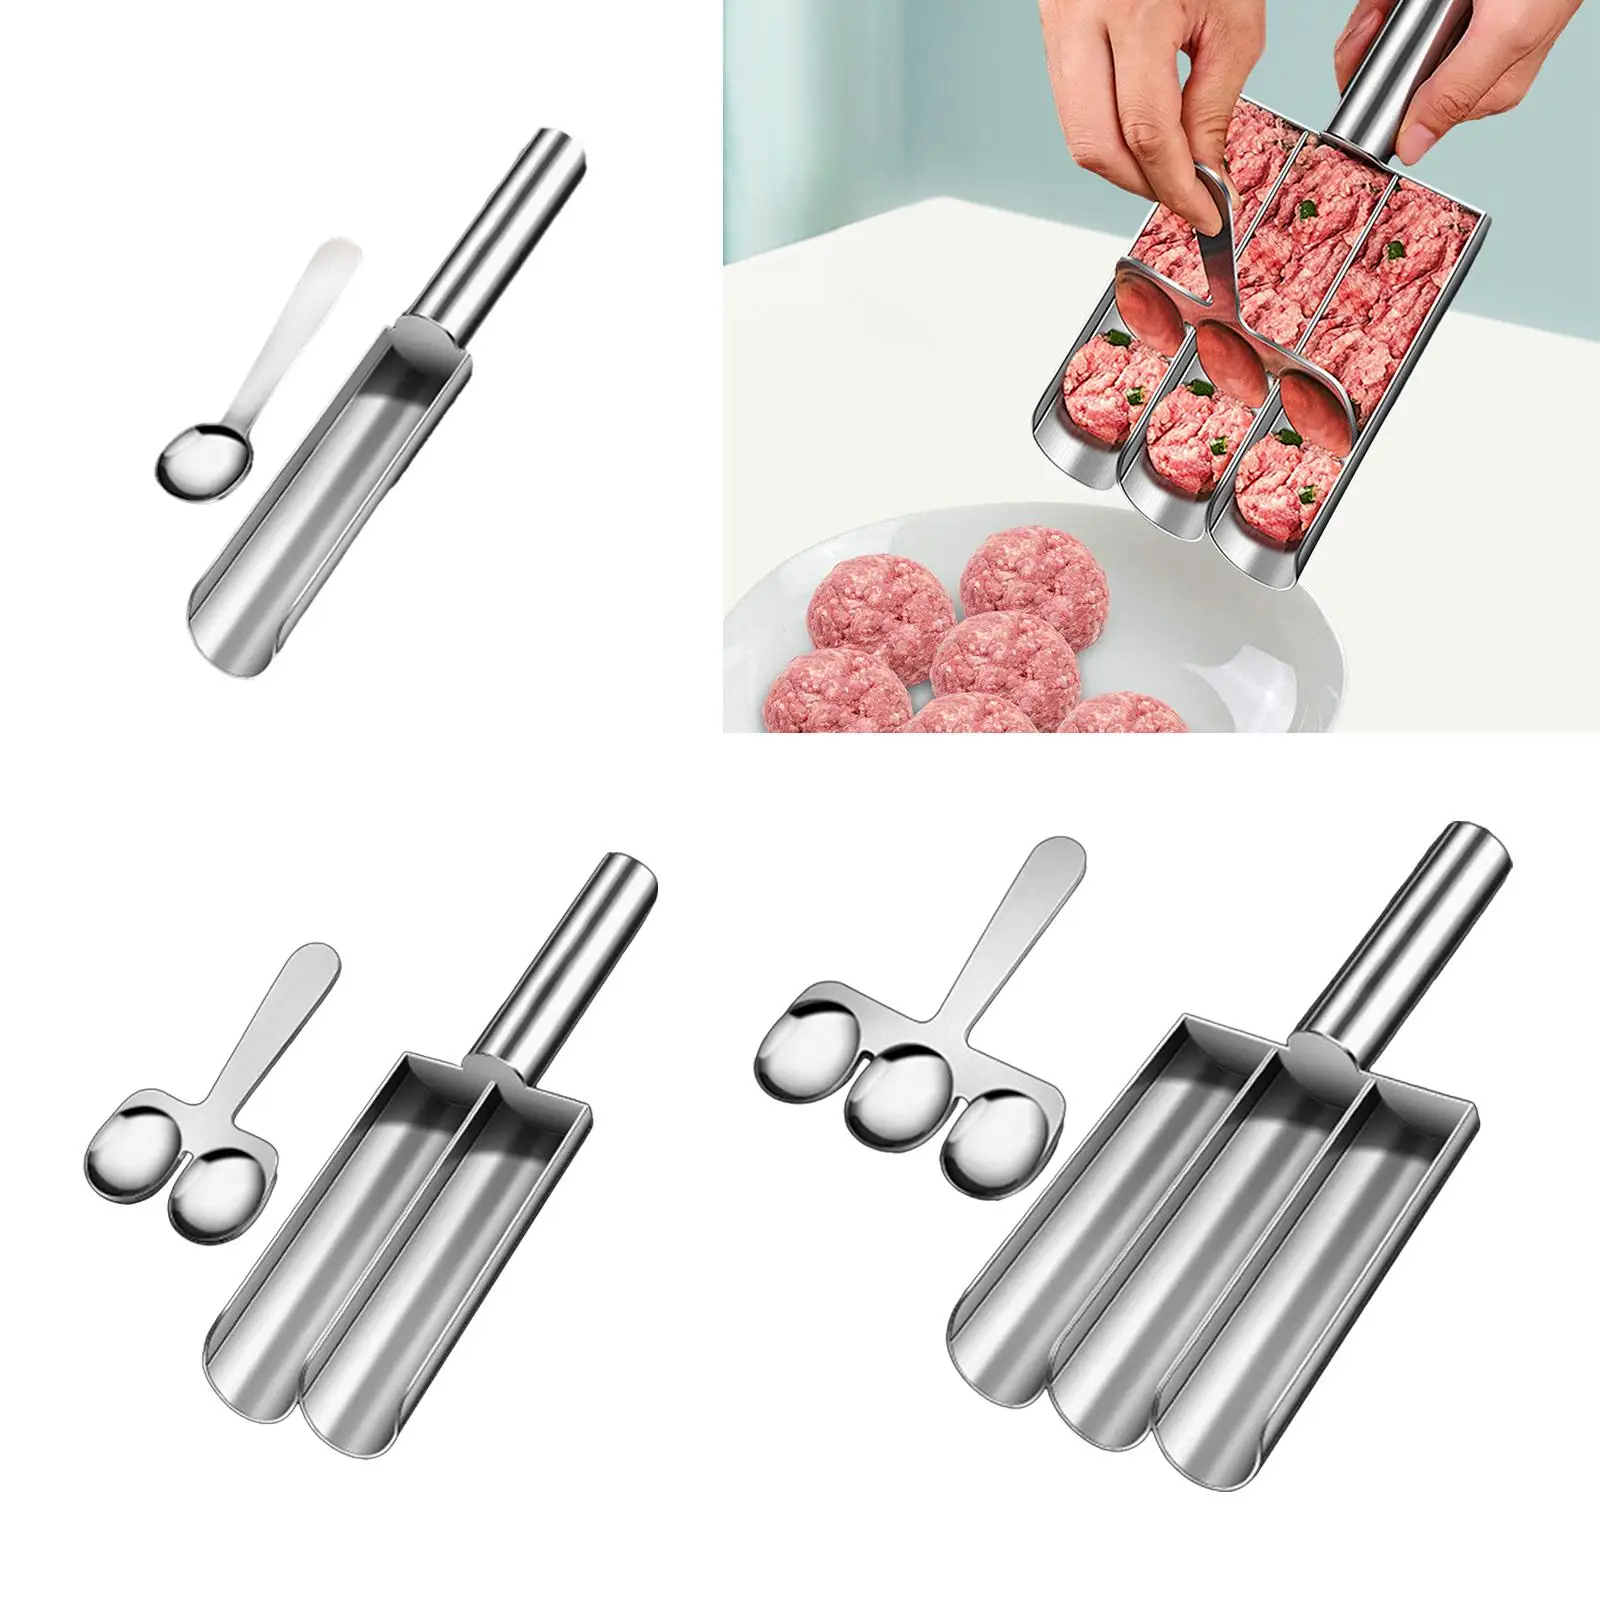 Stainless Steel Meatball Maker for Beef Meat Ball Balls Cooking